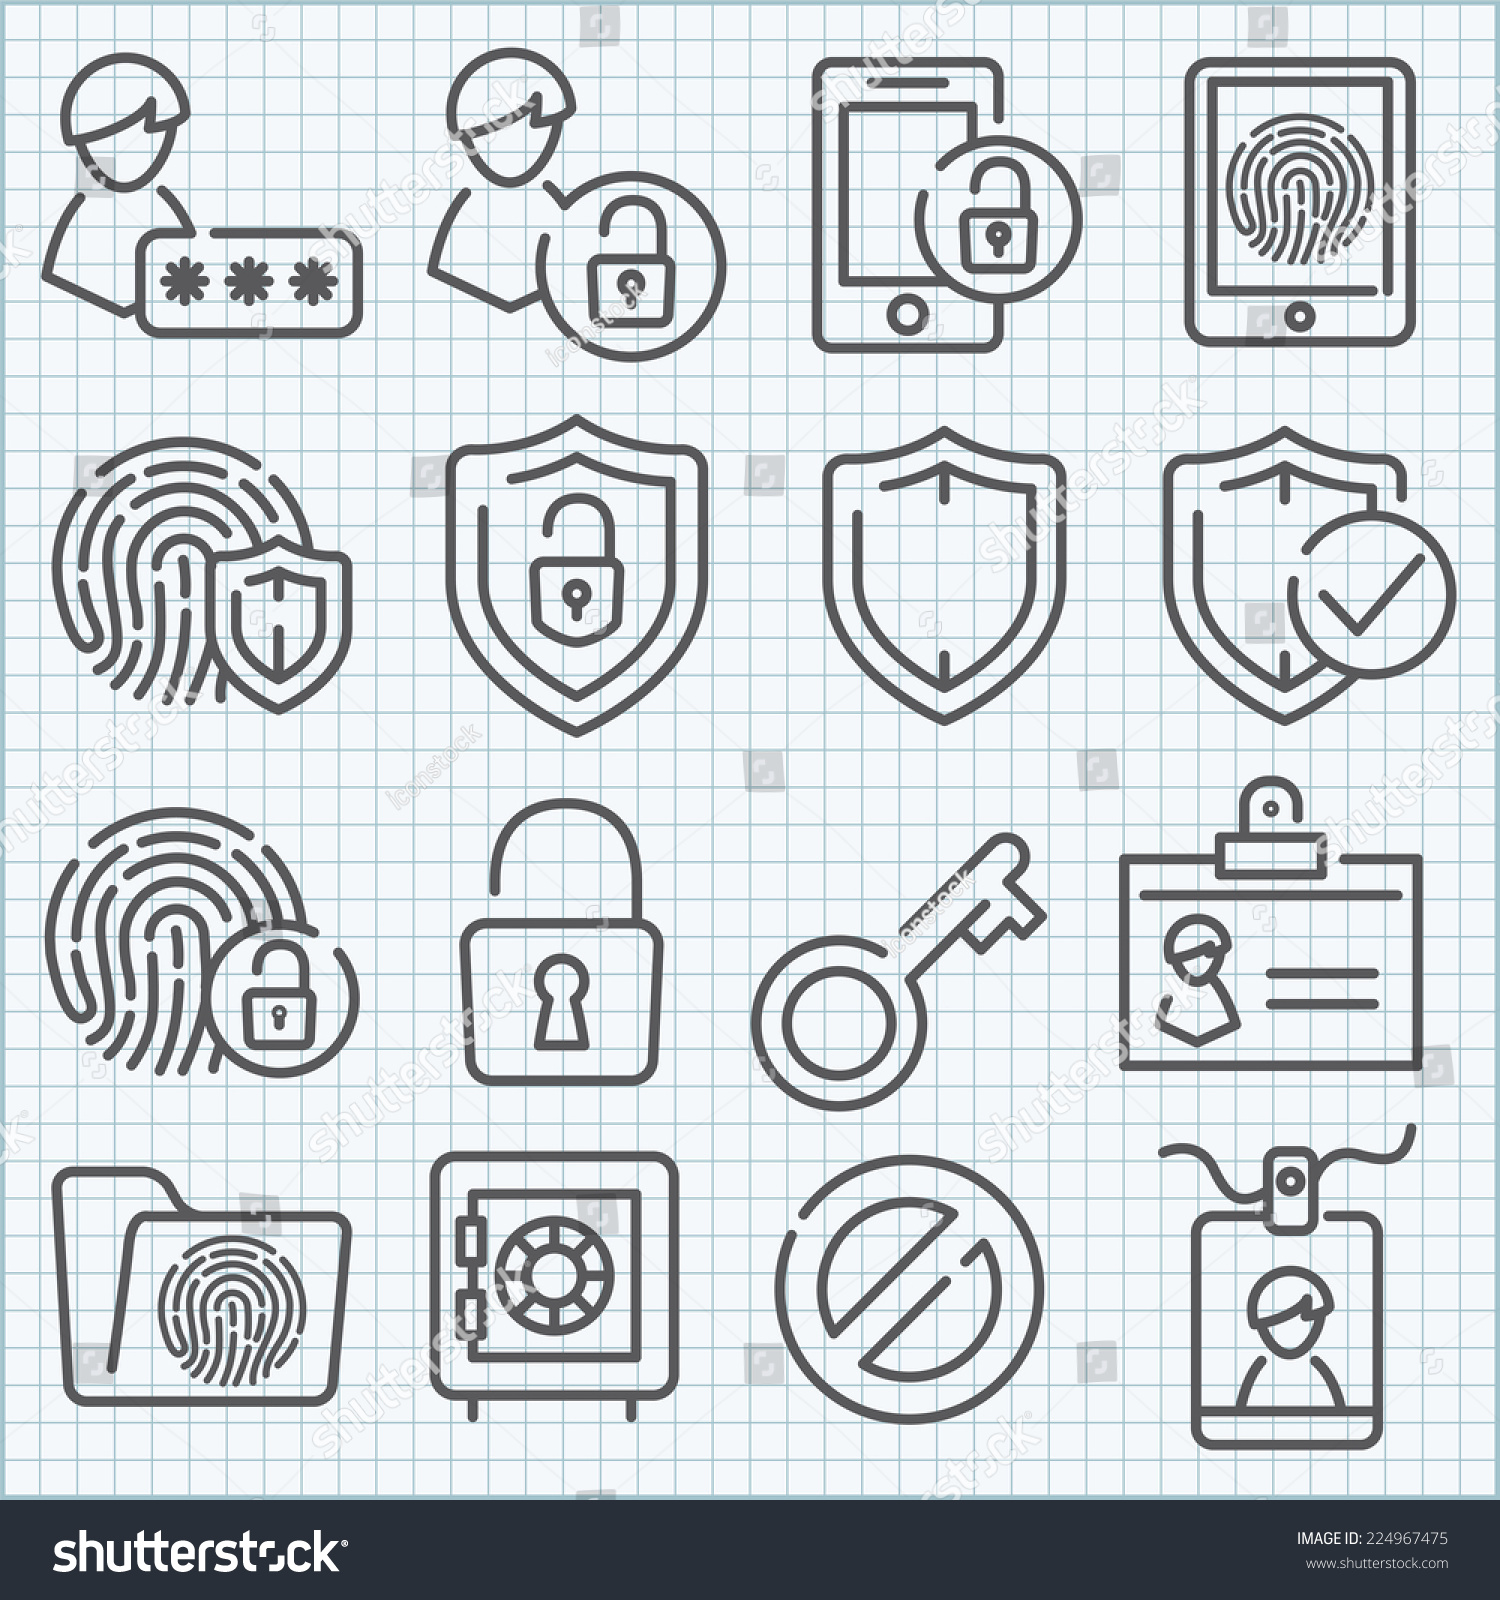 Vector thin line icons set for web design and user interface in applications made in flat graphic style. Nice detail and easily identifiable. Ideal for clean design. #224967475